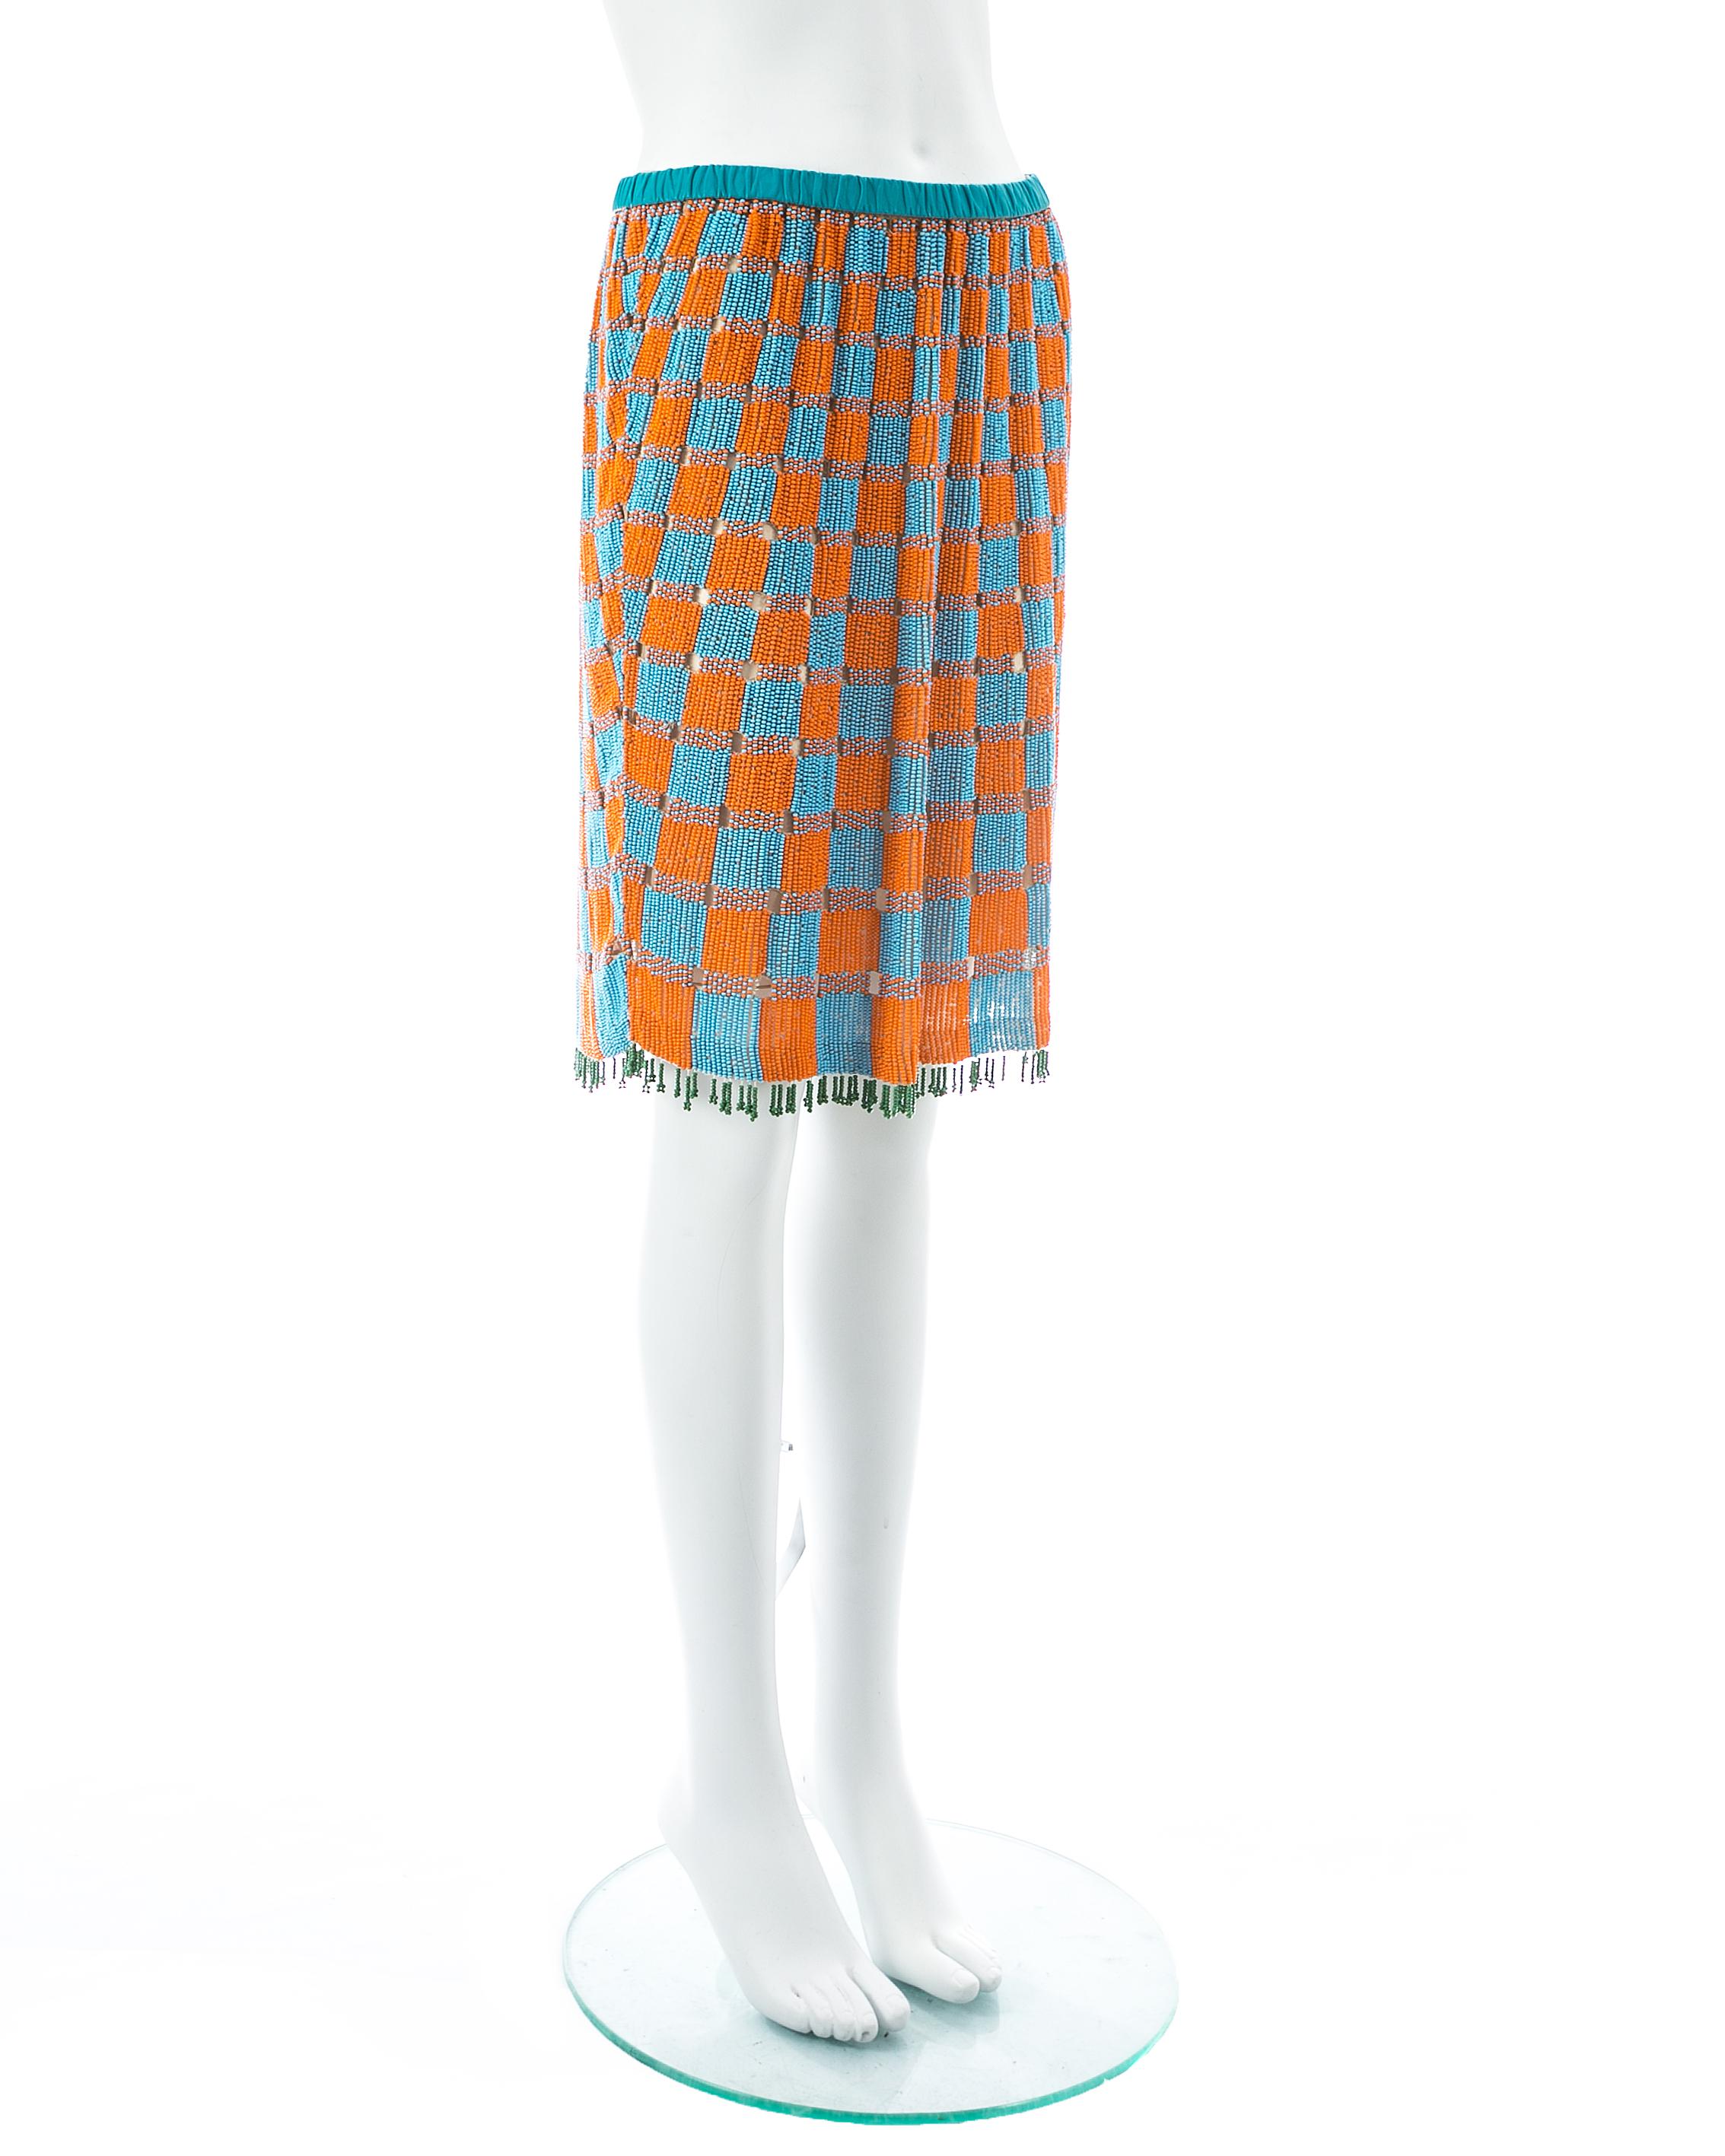 Orange Gucci by Tom Ford orange and blue beaded fringed silk skirt, ss 1999